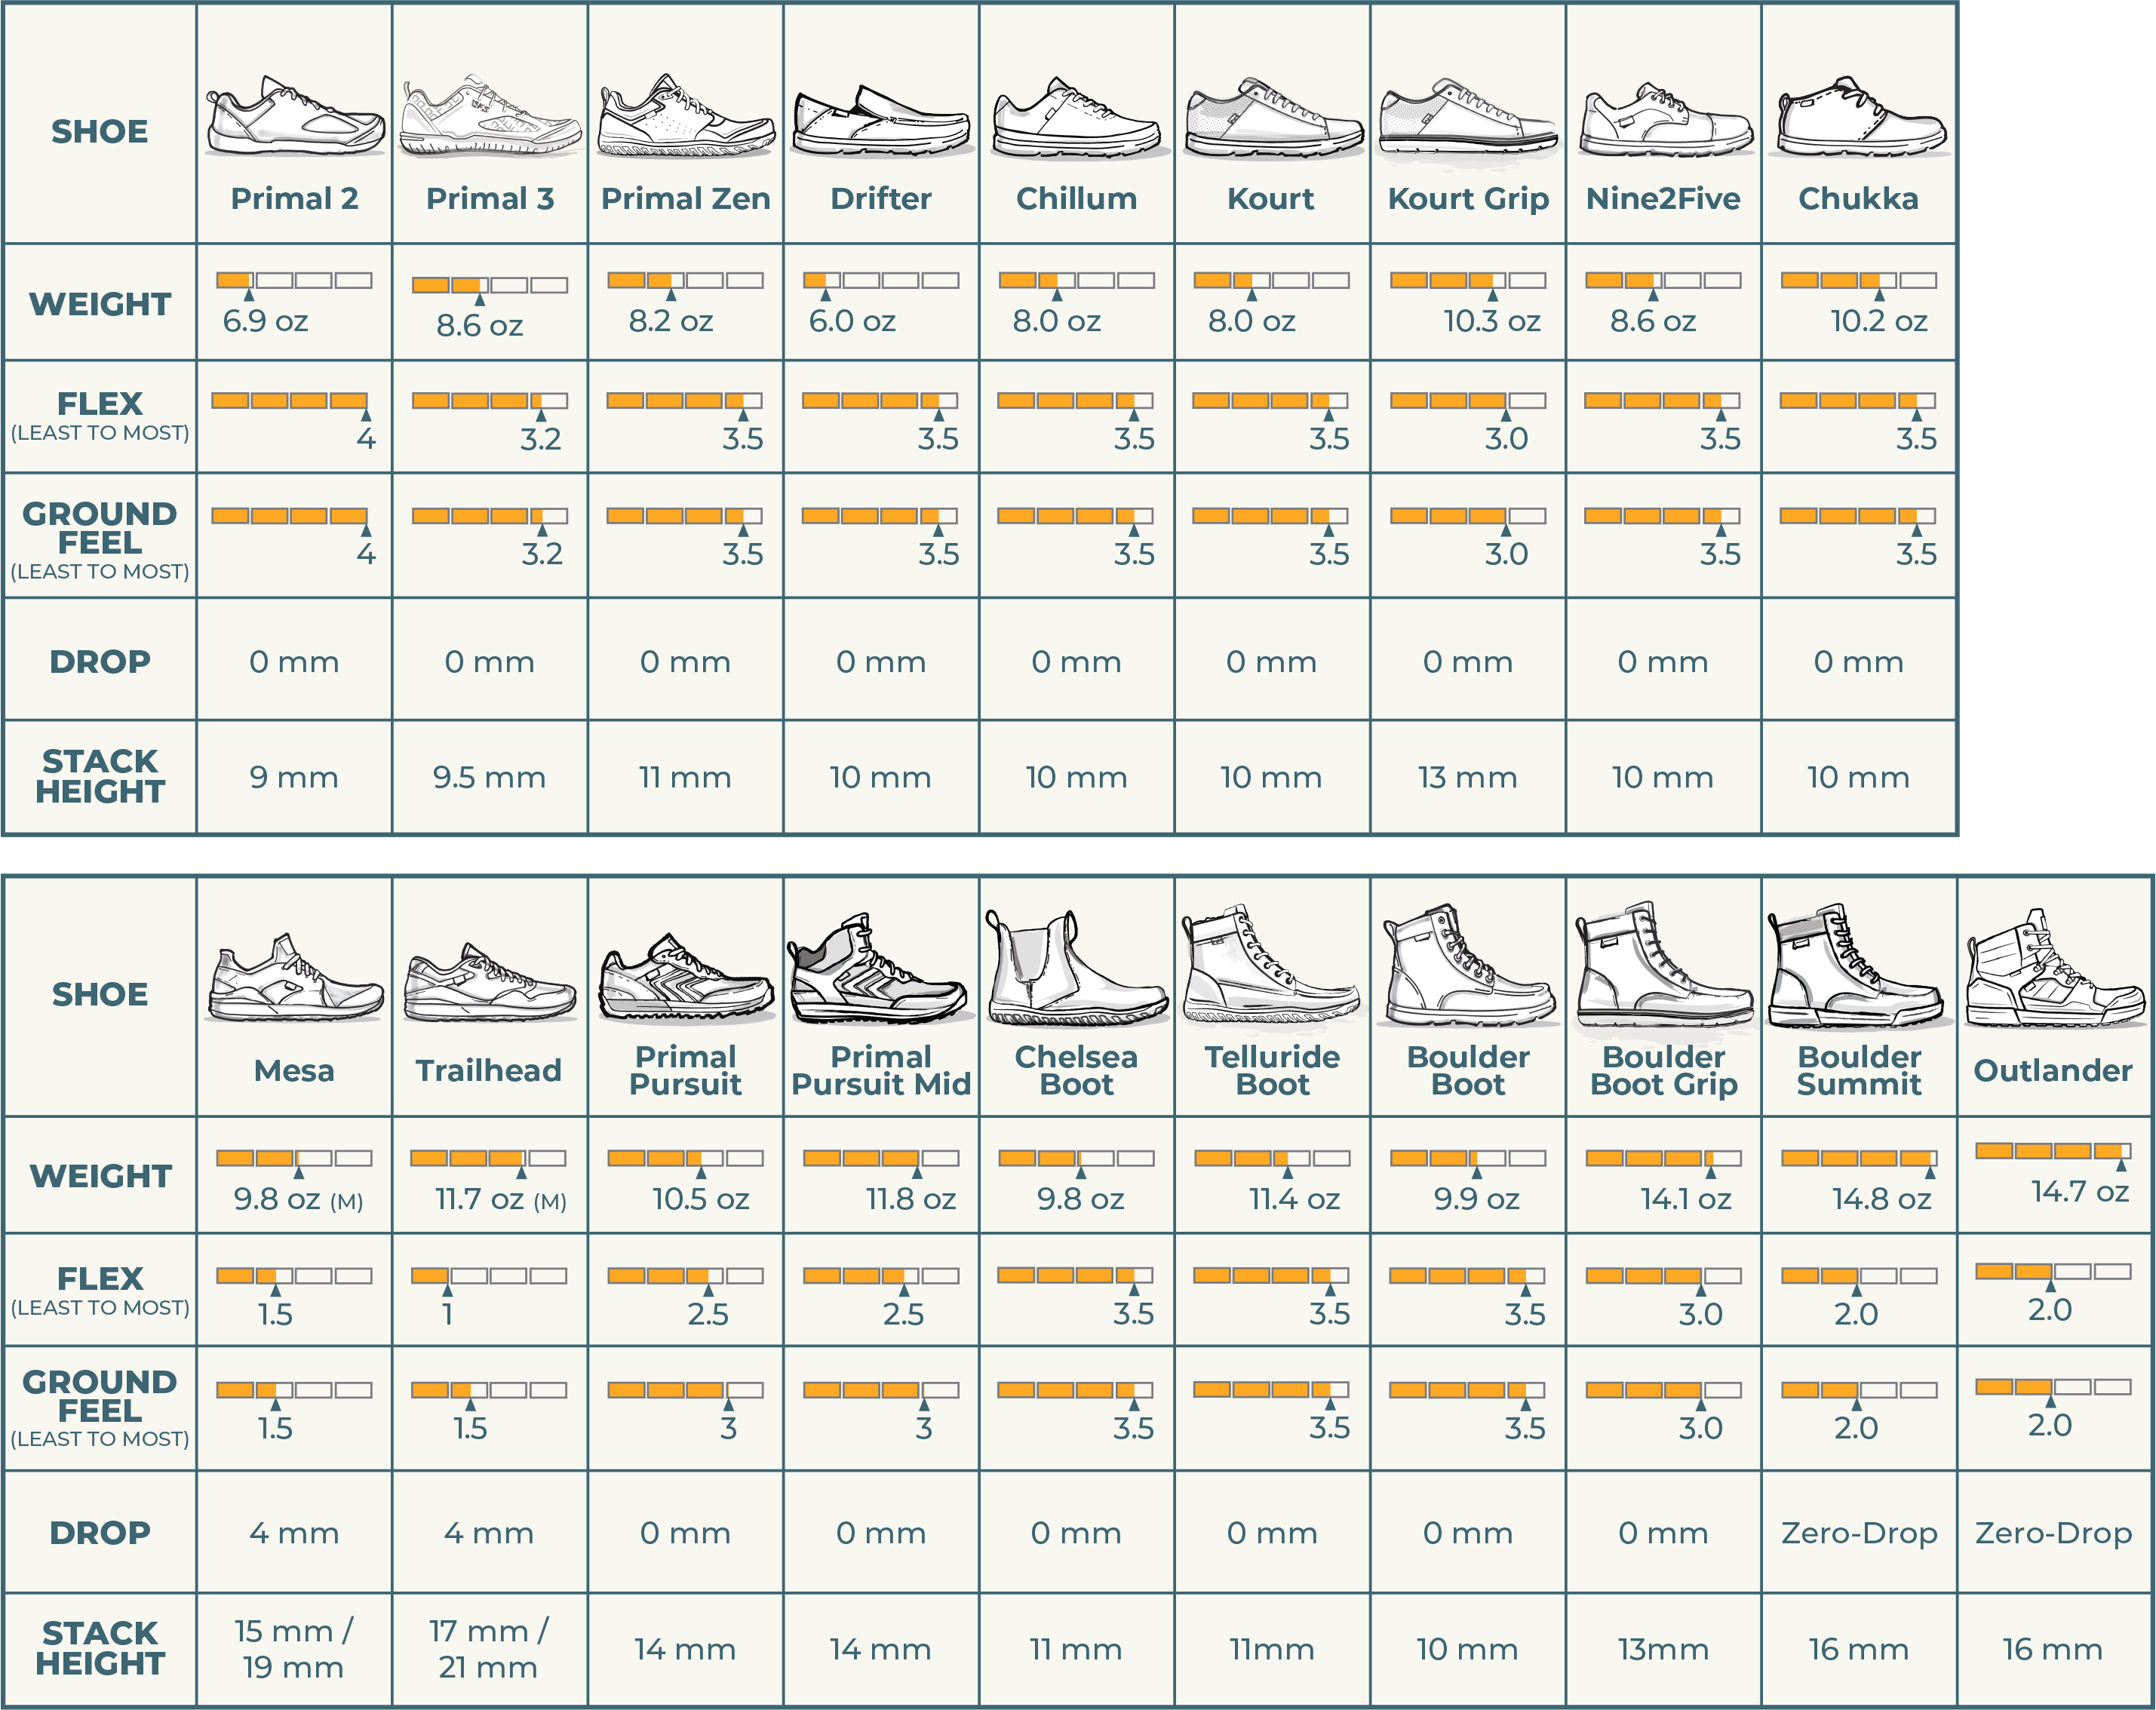 What Is the Average Shoe Size for a Woman?